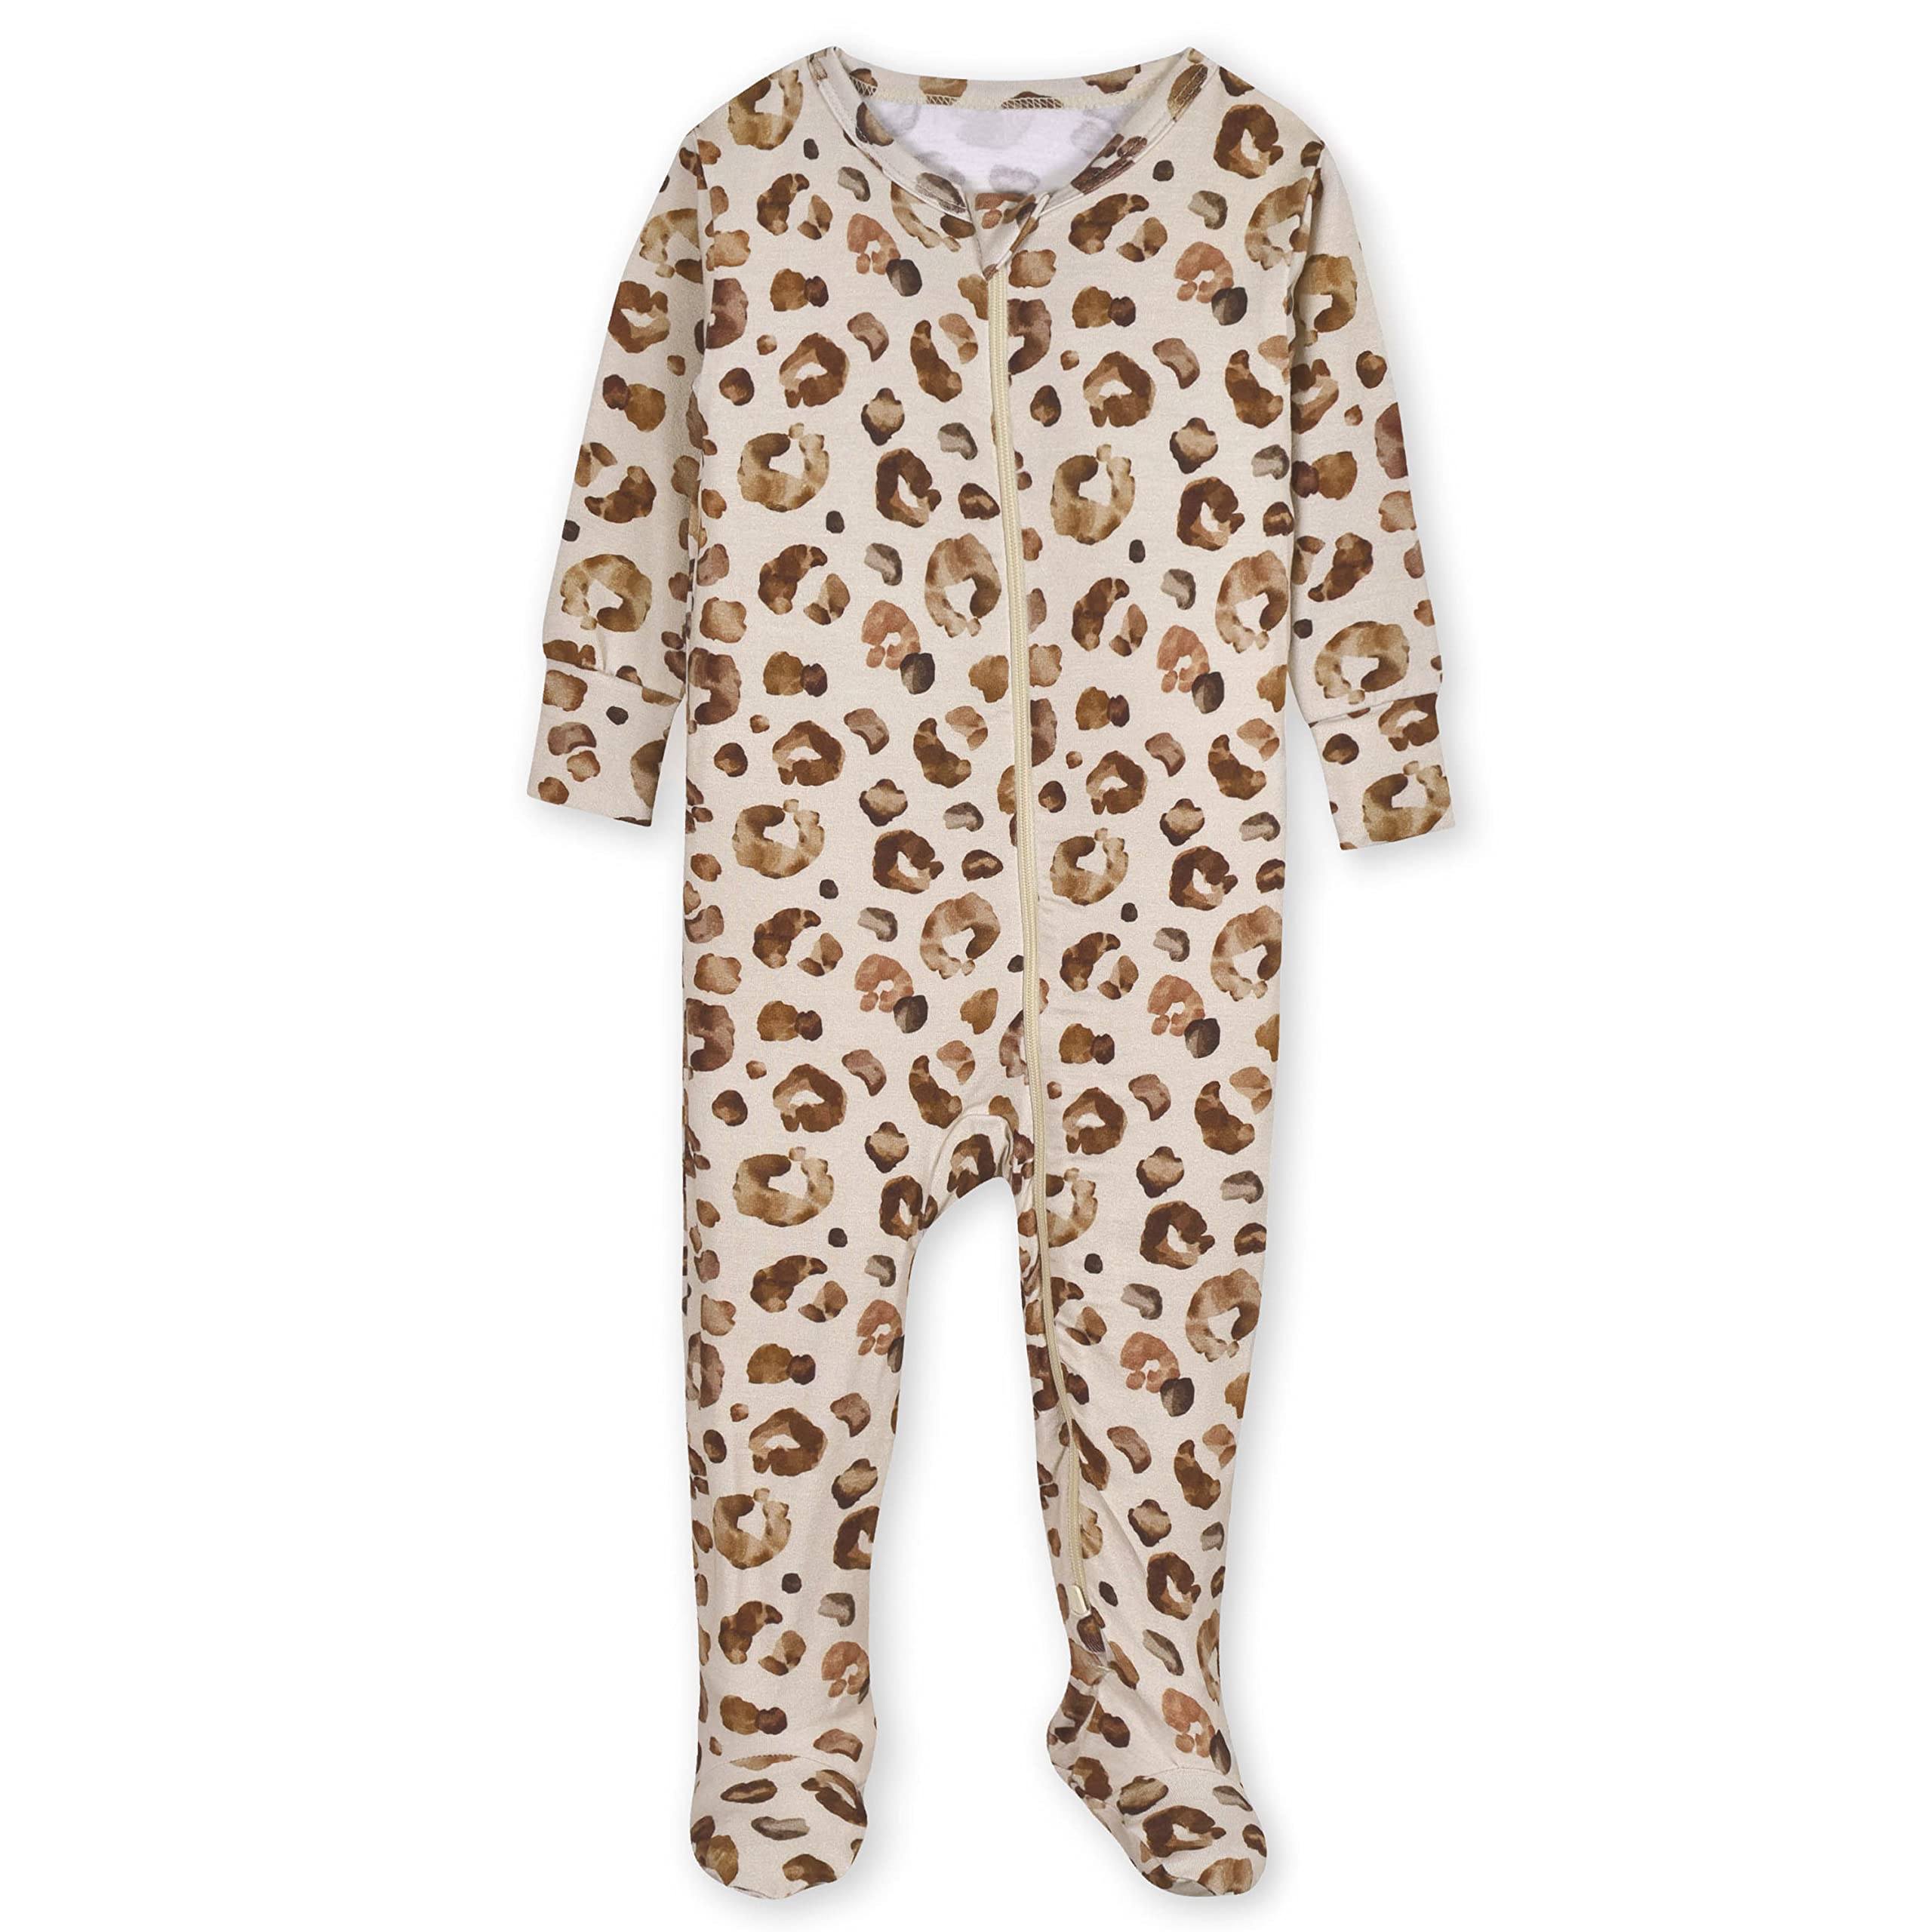 Gerber Baby Girls' Toddler Buttery-Soft Snug Fit Footed Pajamas with Viscose Made with Eucalyptus